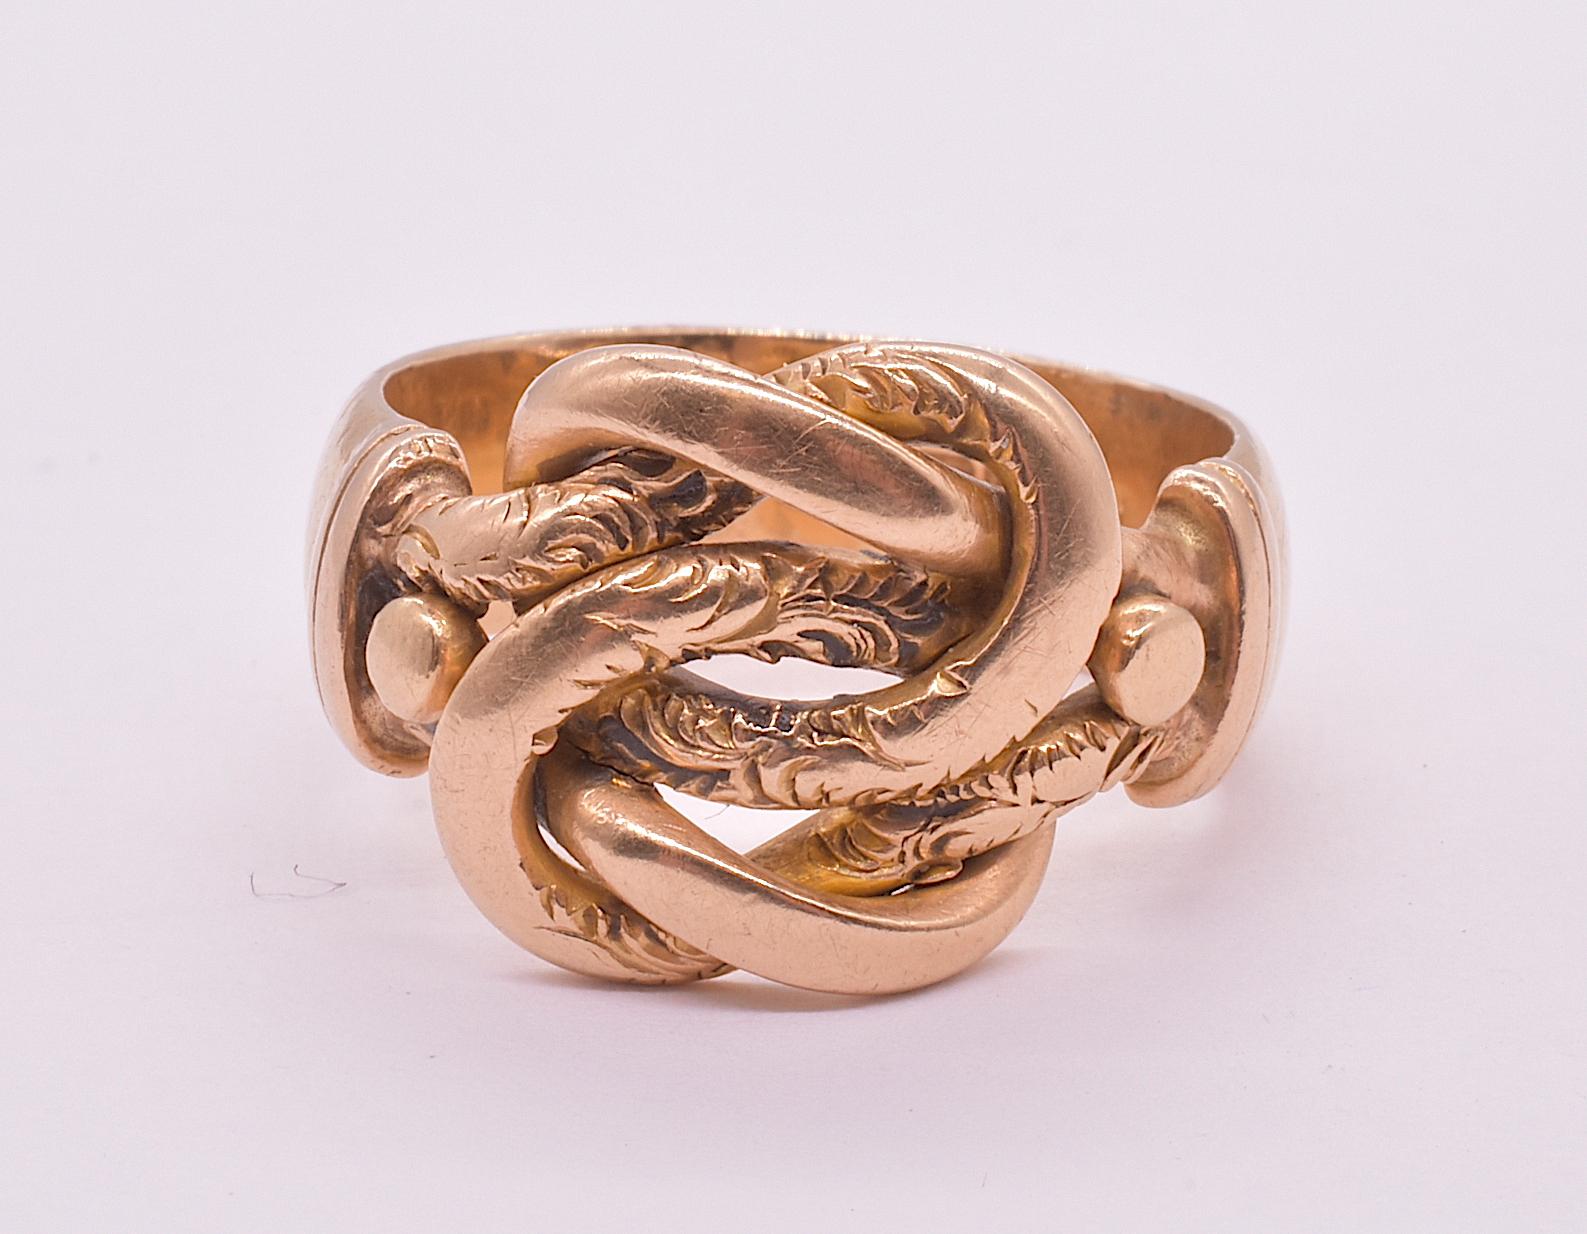 We love everything about this antique, chunky 18K gold lover's knot ring with hallmarks for Chester, 1912, beginning with its solid feel to its hand forged sinuous intertwined bands of gold, some with charming incised flourishes. We also love the